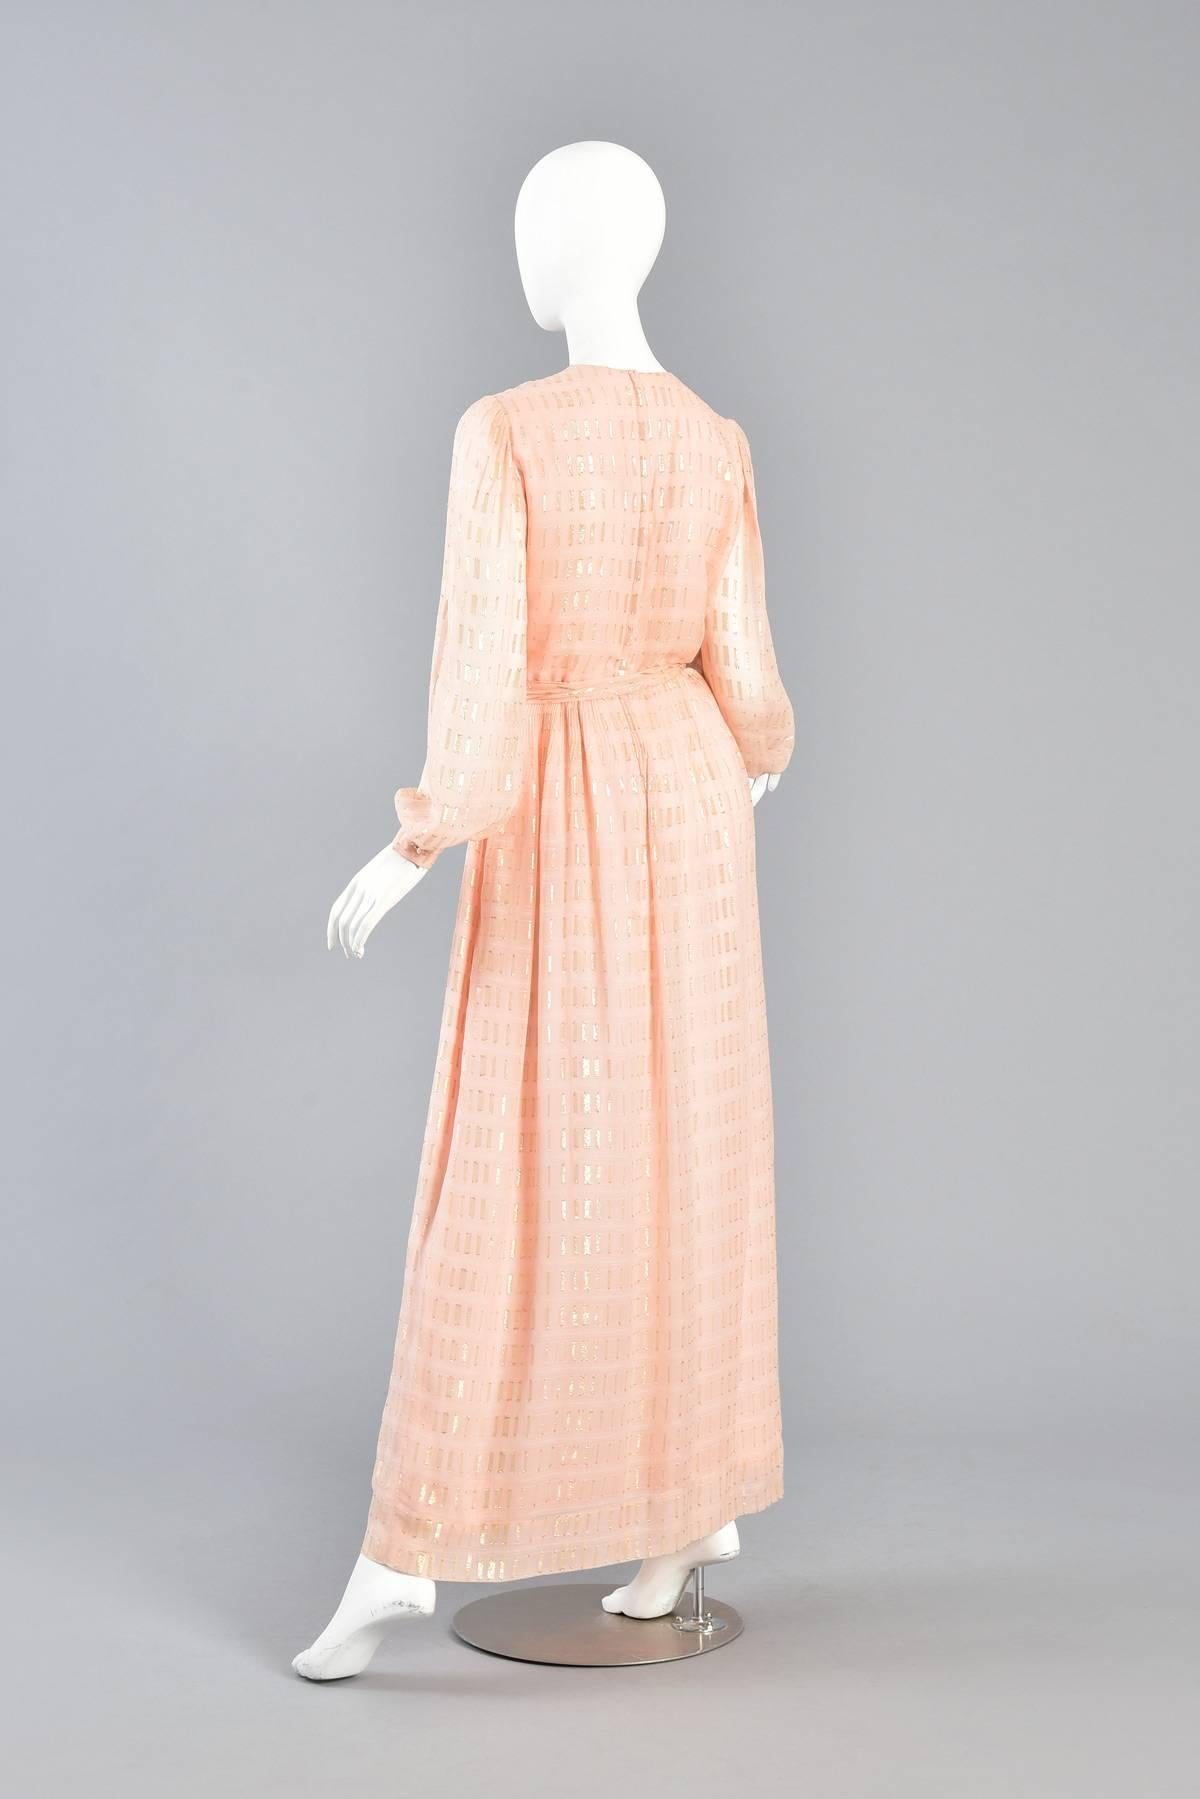 1960s Nat Kaplan Couture Peach Silk Dress with Gold Lurex Threads Throughout For Sale 3